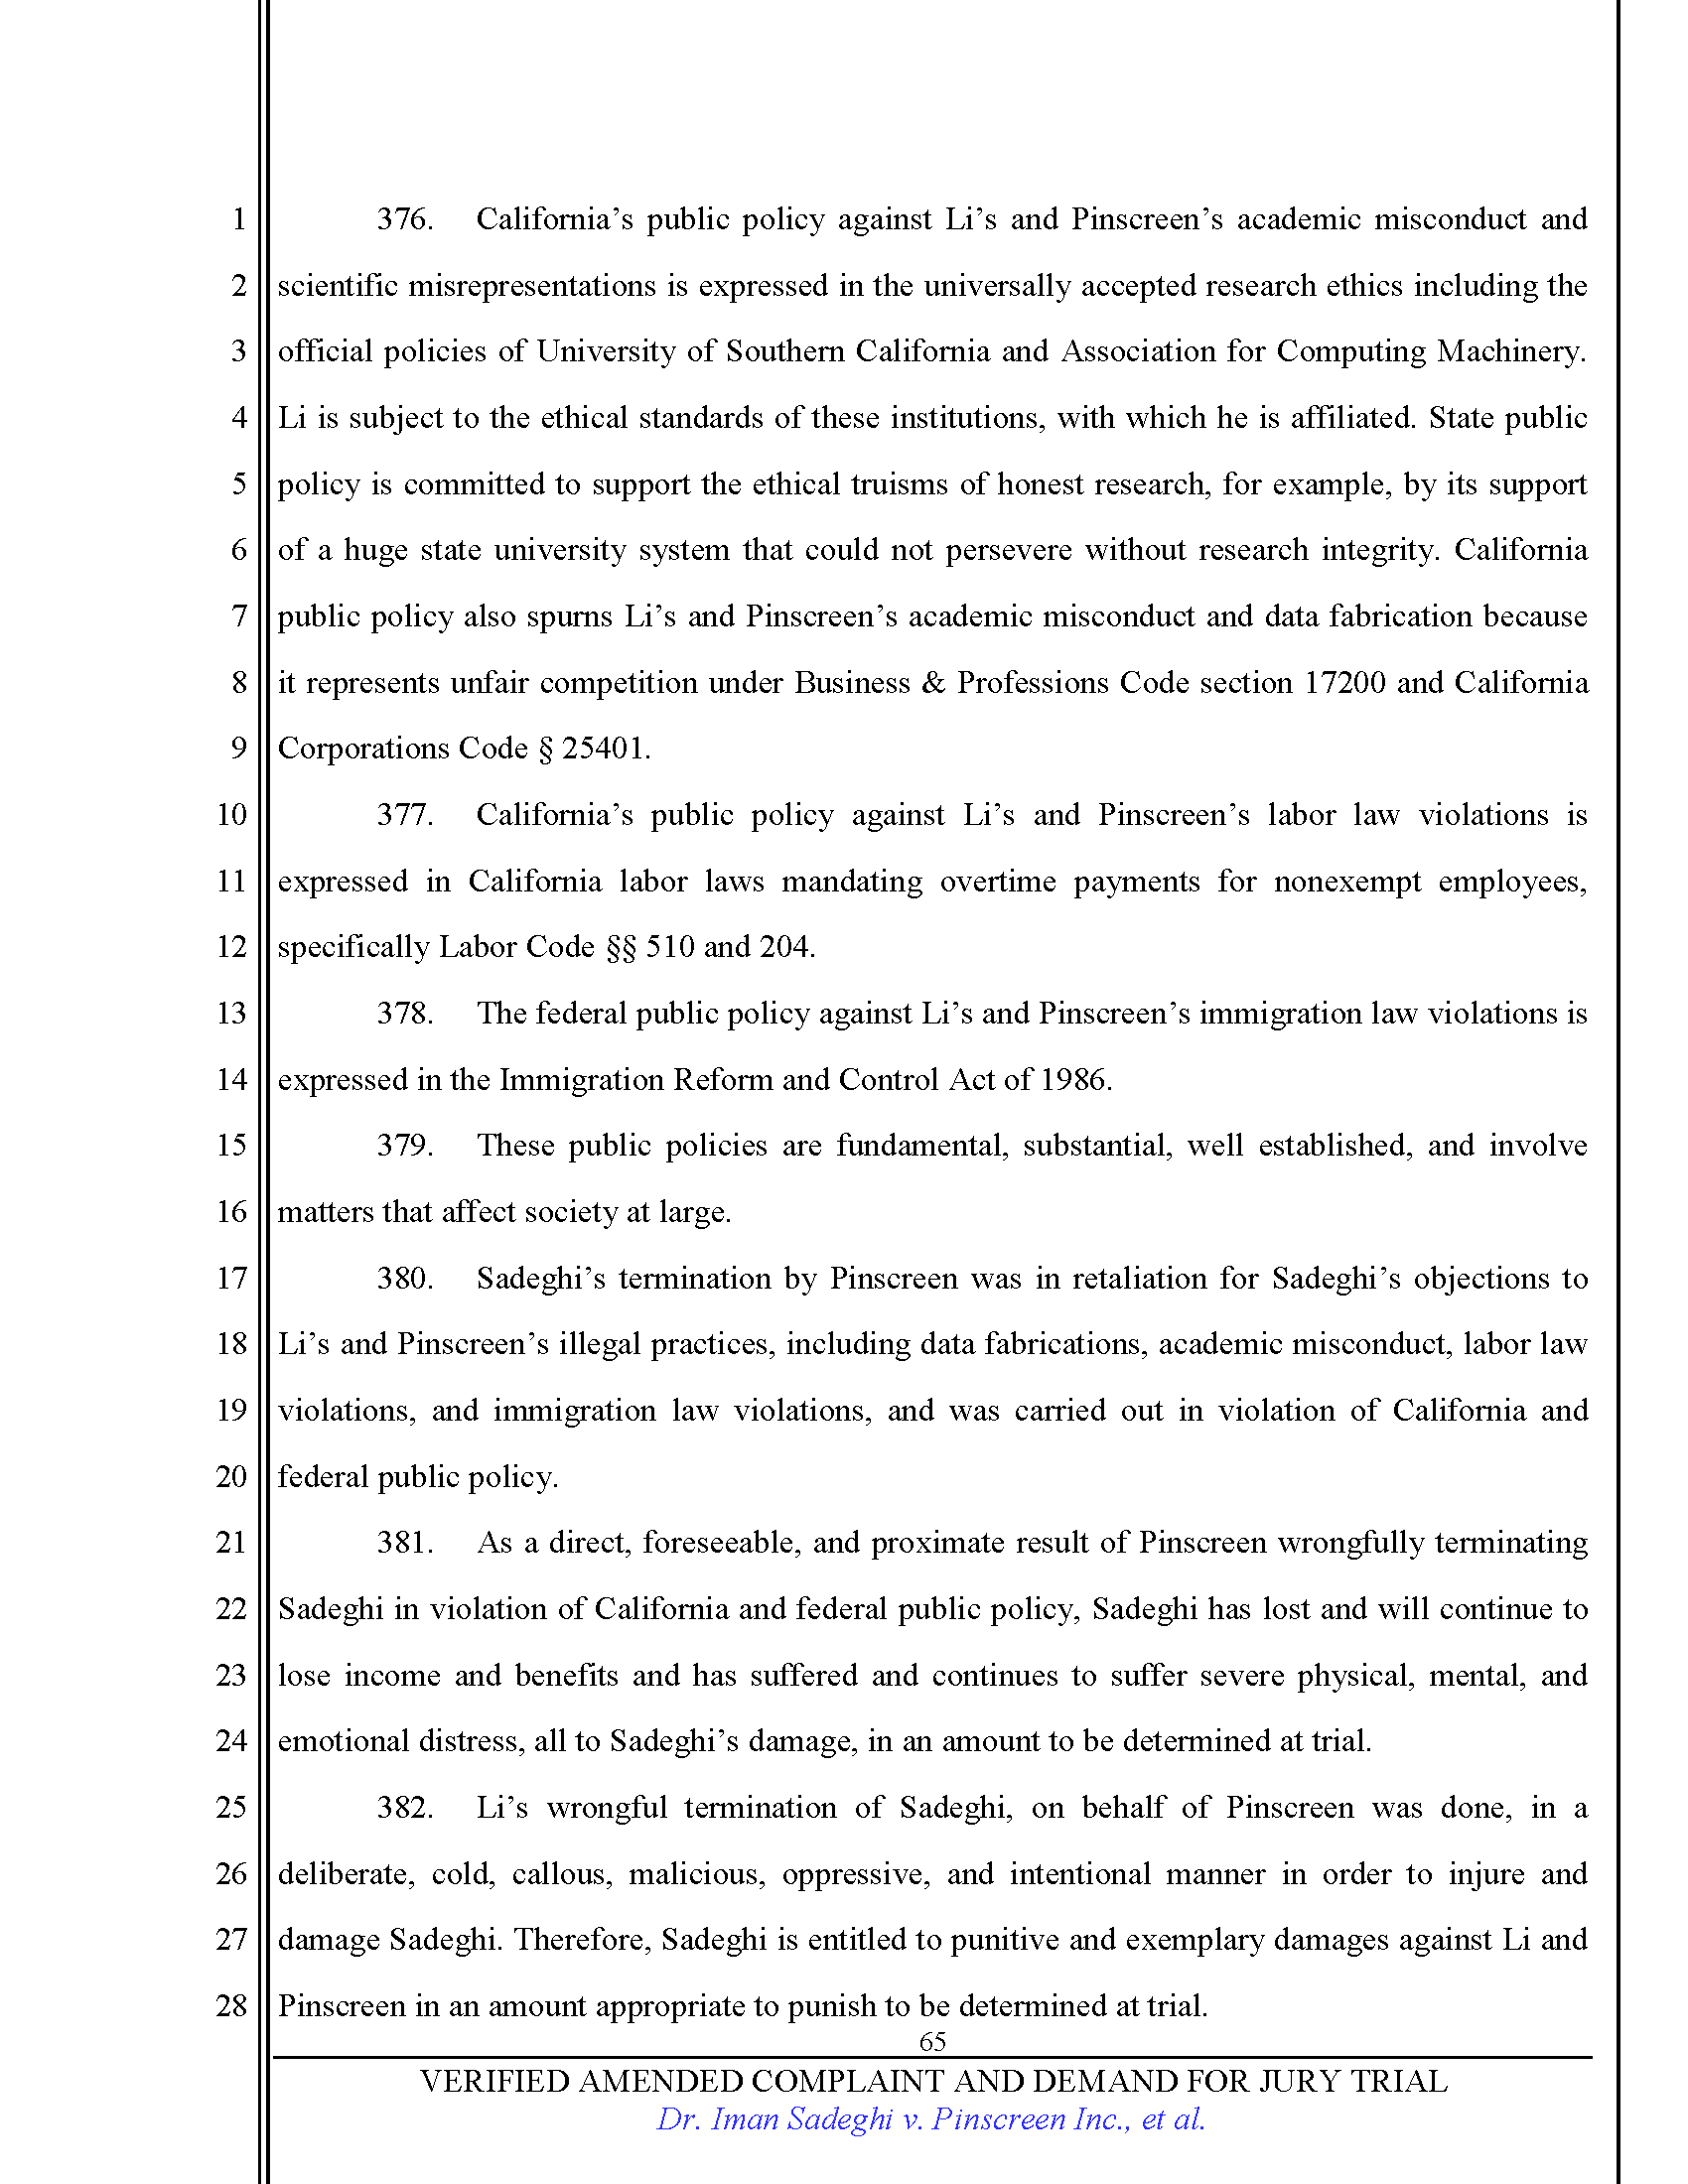 First Amended Complaint (FAC) Page 65